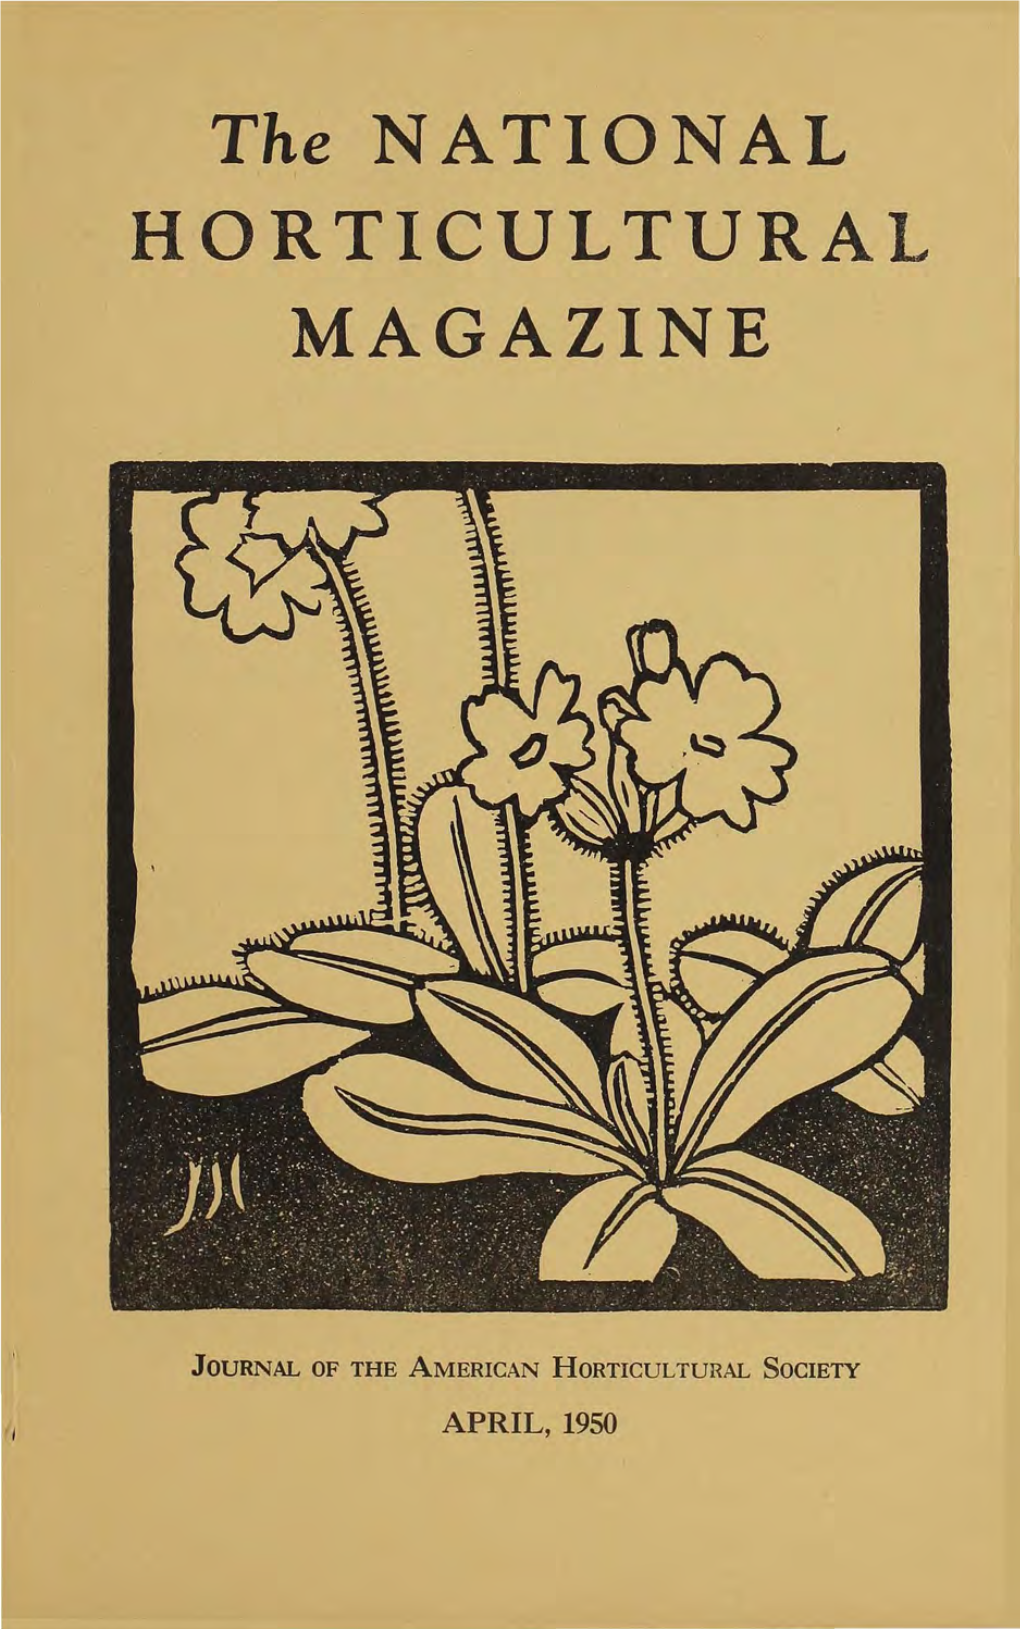 The NATIONAL HORTICULTURAL MAGAZINE